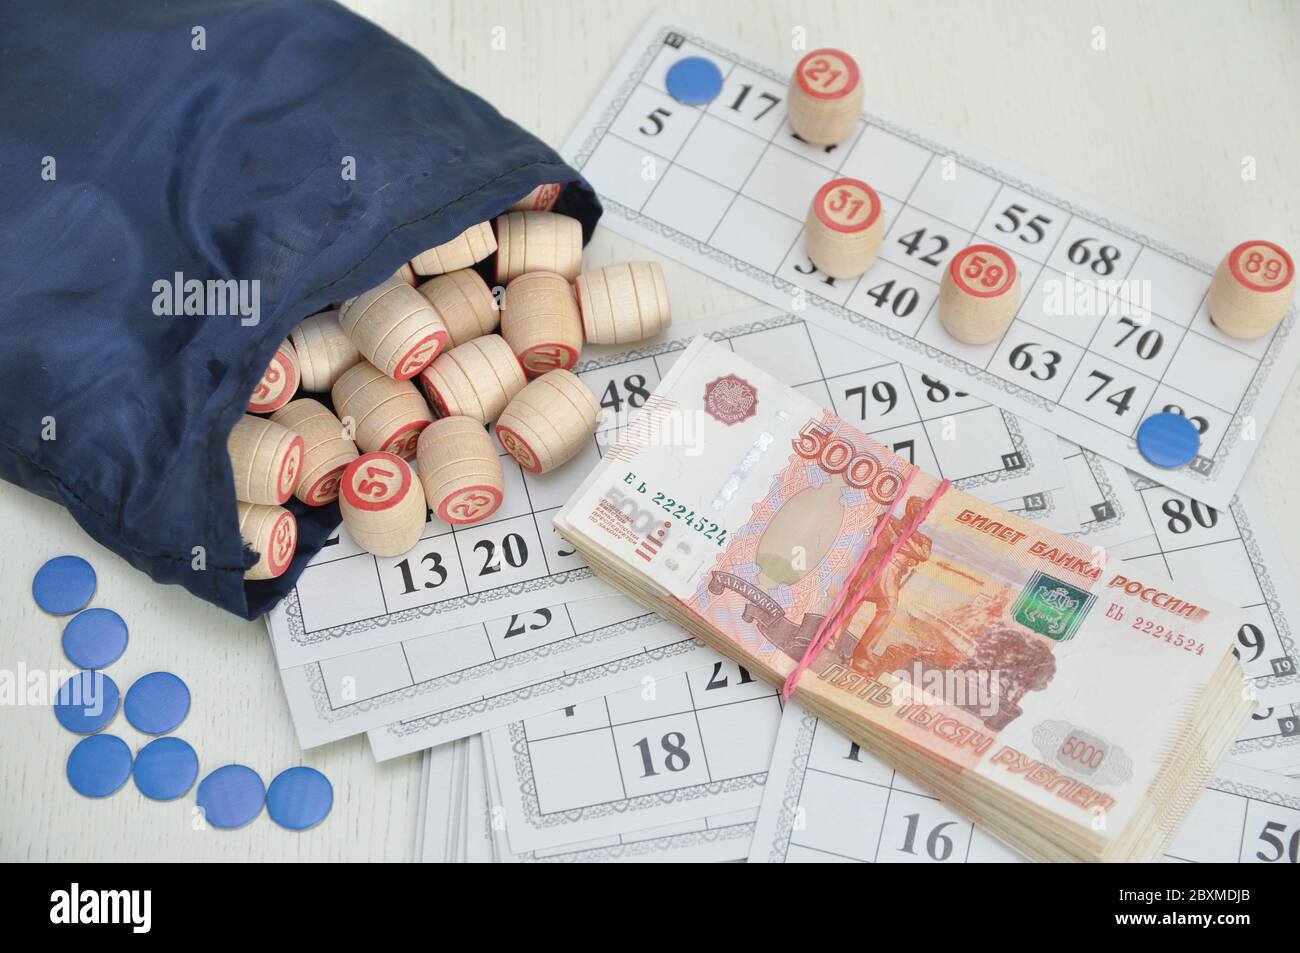 Russian rubles. board game lotto. Wooden barrels on paper cards, a game for money. Stock Photo